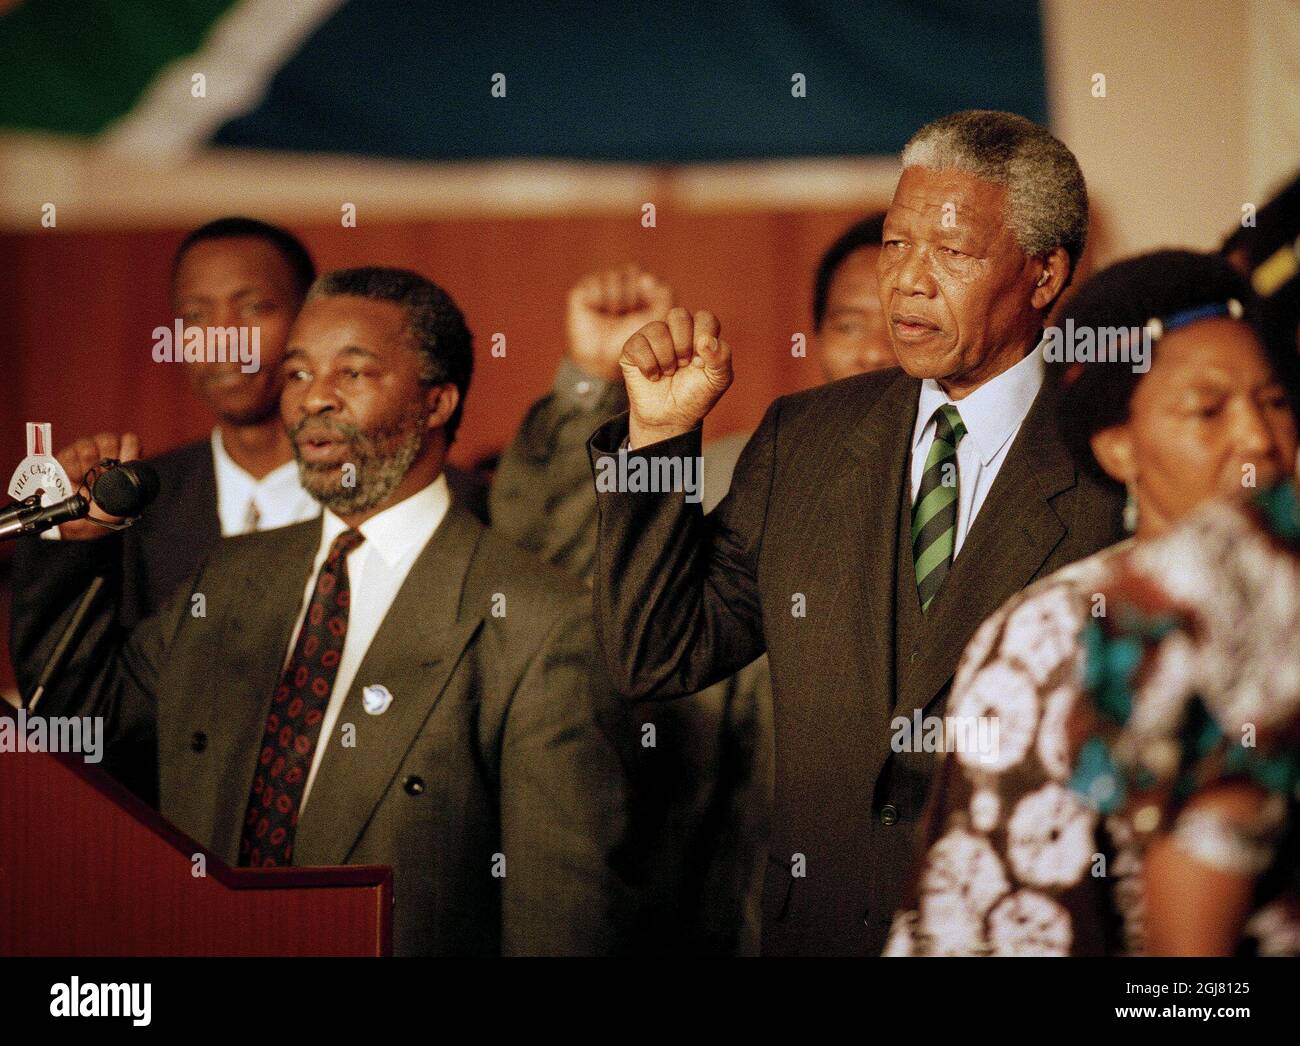 Johannesburg 19940503 - Nelson Mandela and Thabo Mbeki, celebrating the victory in the first free elections in South Africa in 1994. Foto: Ulf Berglund / SCANPIX / Kod: 33490  Stock Photo